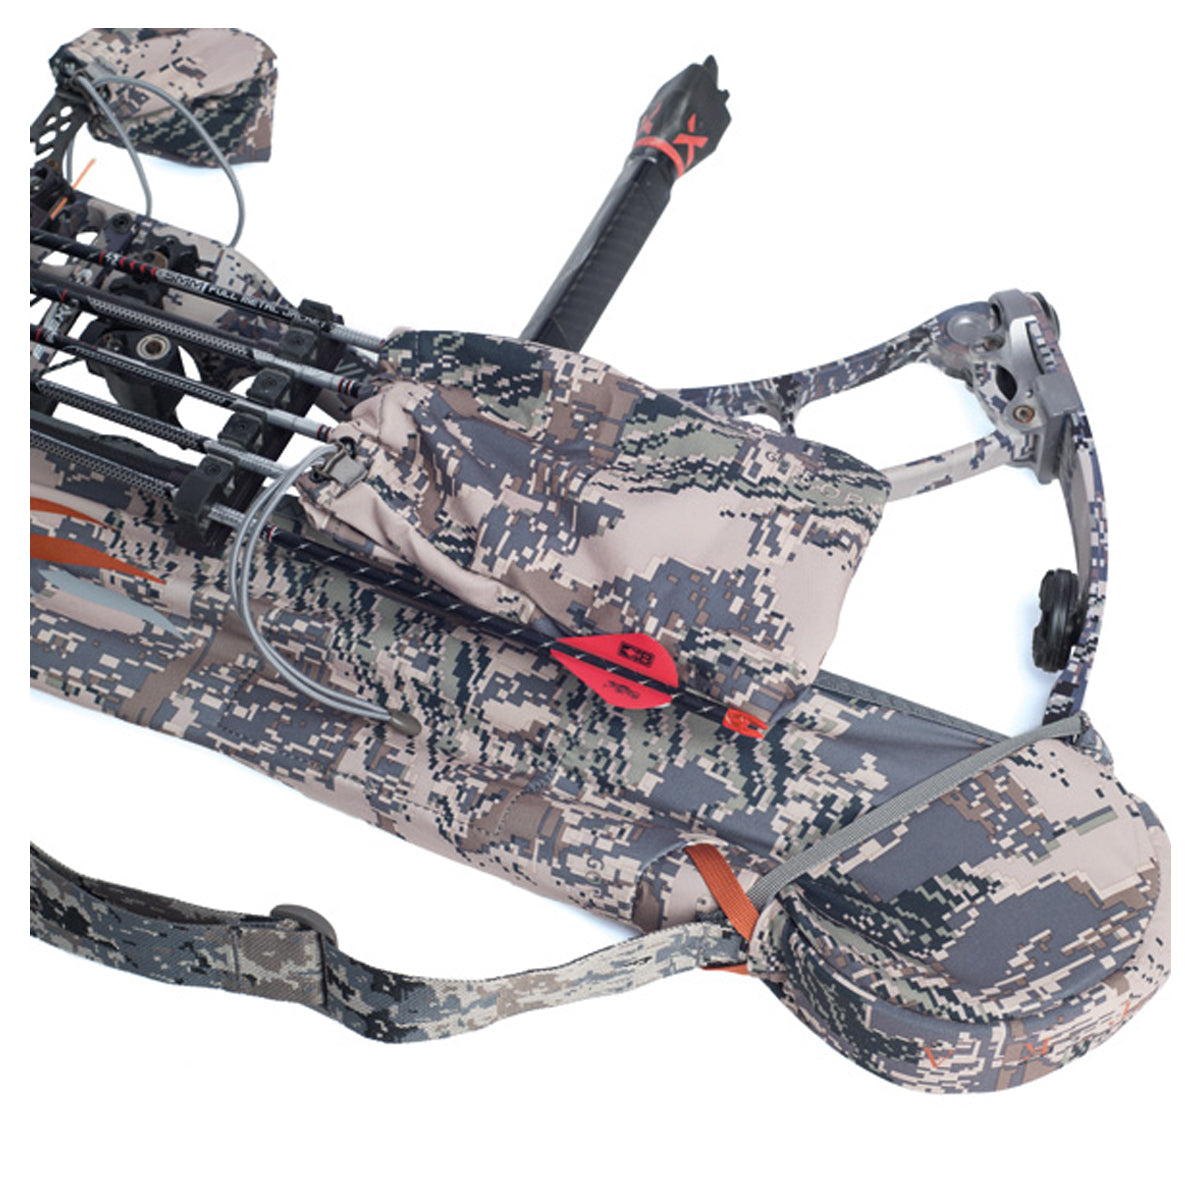 Sitka Bow Sling in Sitka Bow Sling by Sitka | Archery - goHUNT Shop by GOHUNT | Sitka - GOHUNT Shop